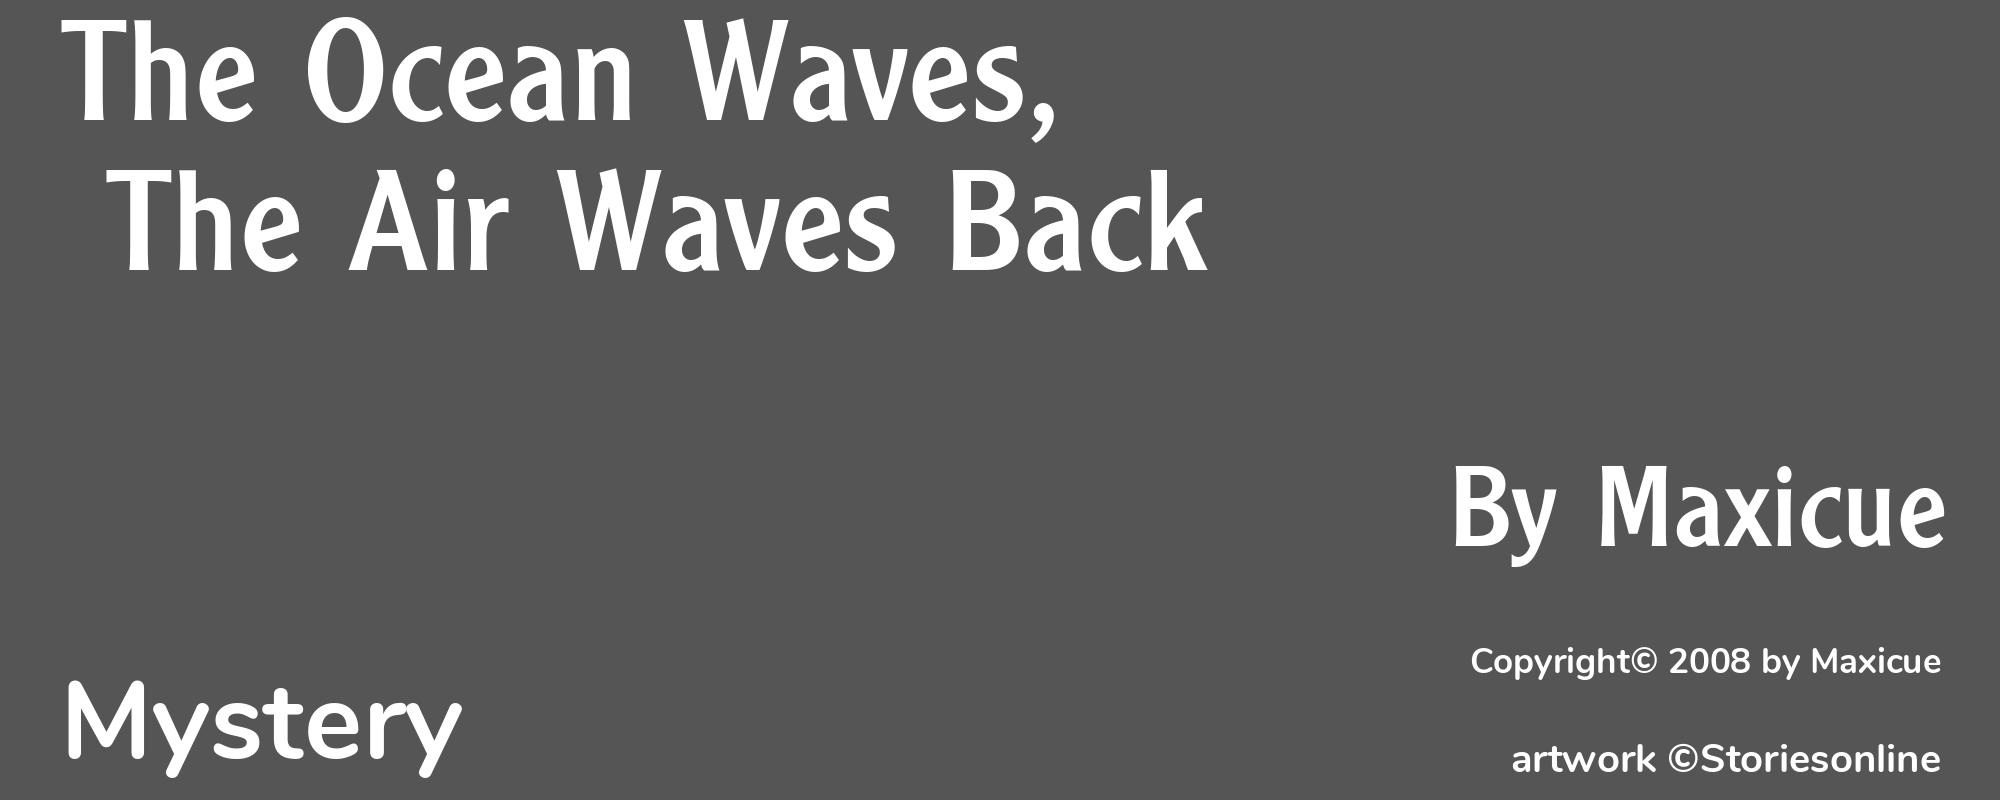 The Ocean Waves, The Air Waves Back - Cover